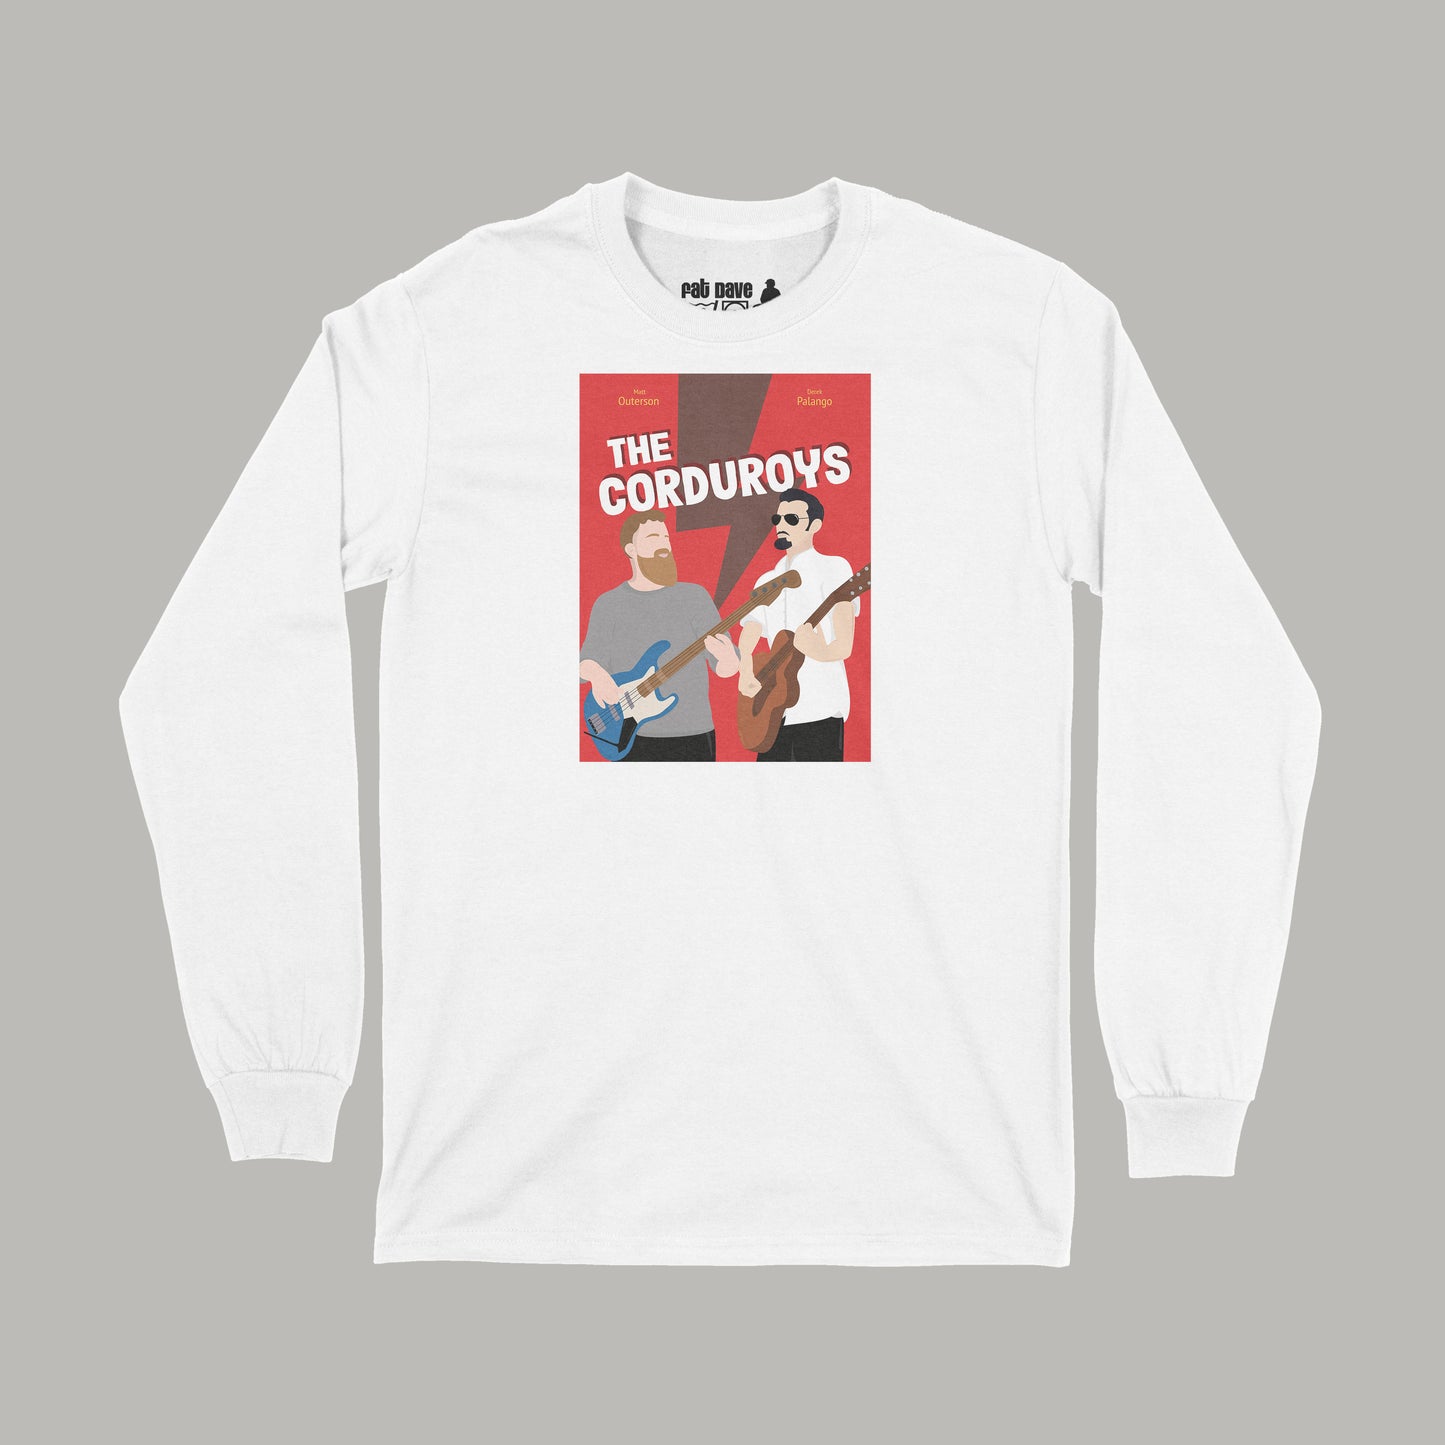 Brantford, Fat Dave, Long Sleeve T-Shirt, Musician, Poster, The Corduroys, White